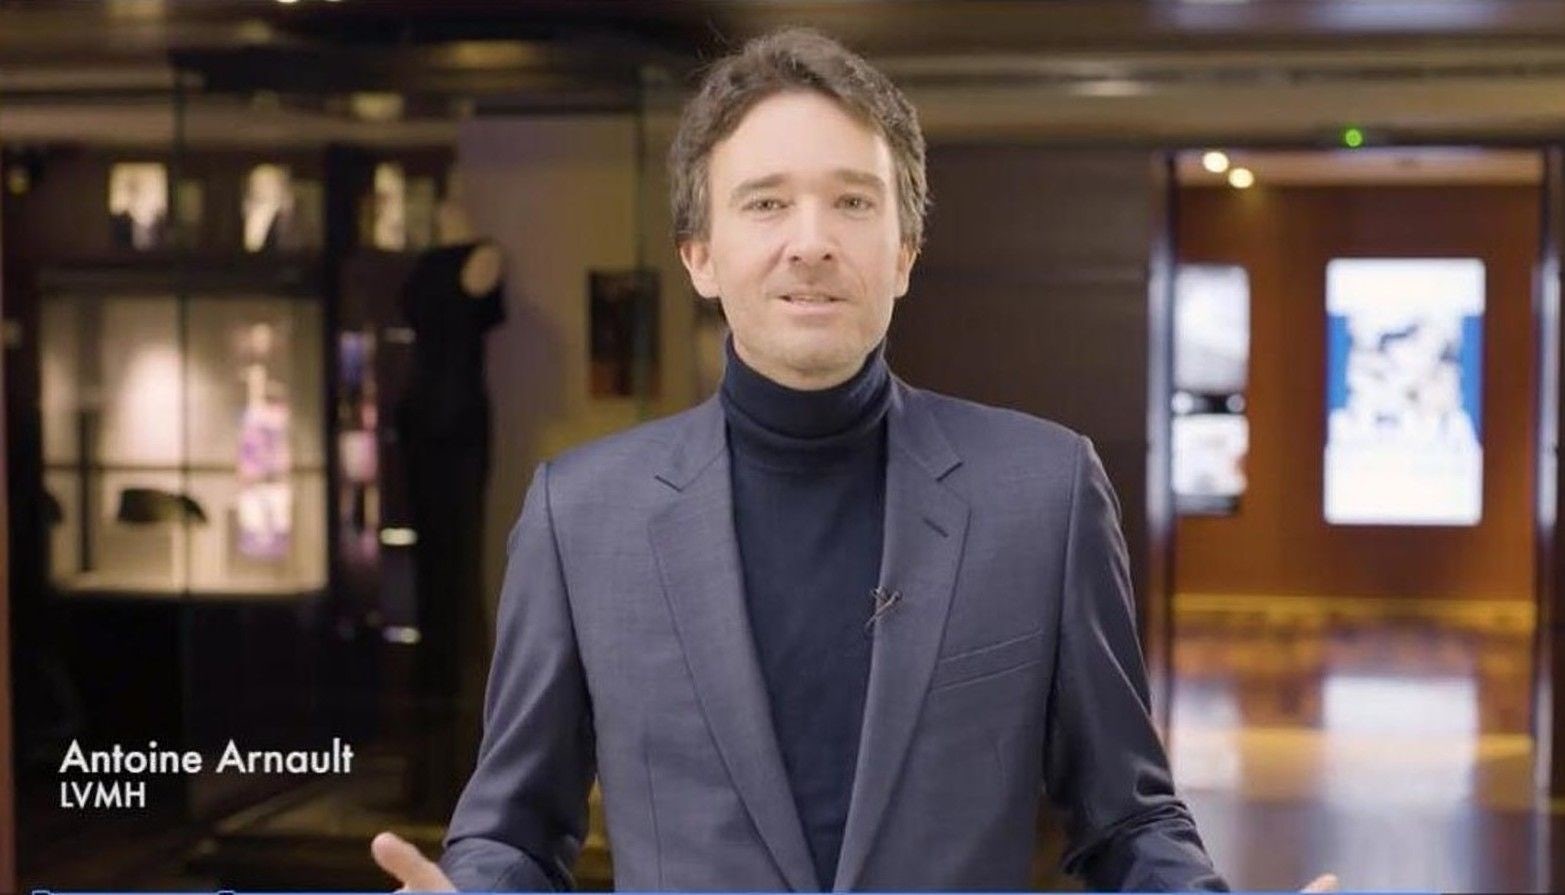 Arnault: LVMH to Open Design Houses, Roll Out the Red Carpet for Chinese Guests